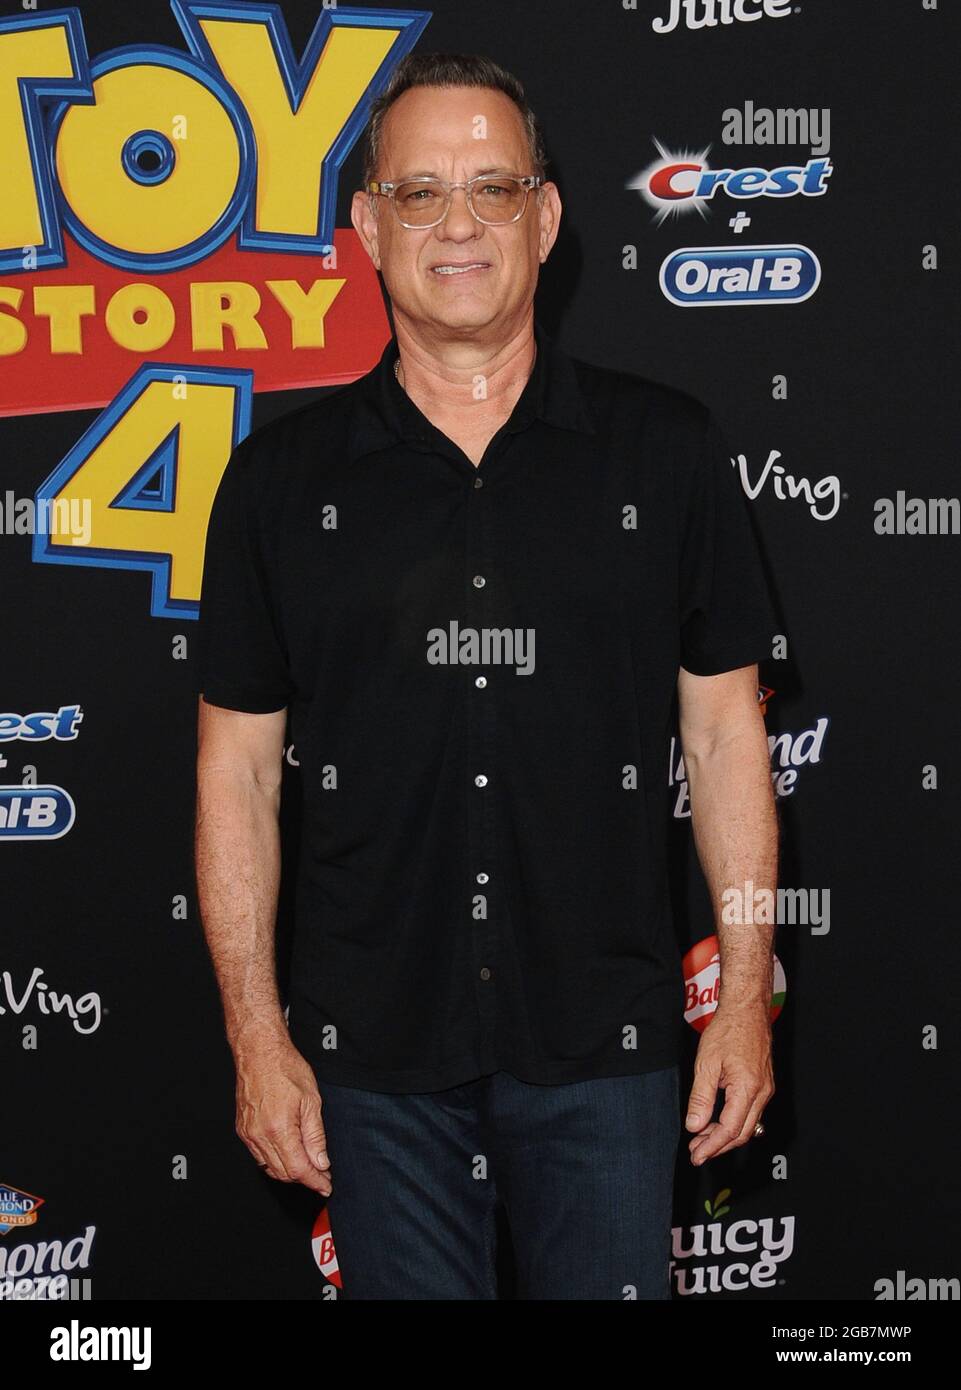 Hollywood, CA - 06/11/2019 Toy Story 4 Los Angeles Premiere -PICTURED: Tom  Hanks -PHOTO by: Sara De Boer/startraksphoto.com -KRL 0273 Startraks Photo  New York, NY For licensing please call 212-414-9464 or email